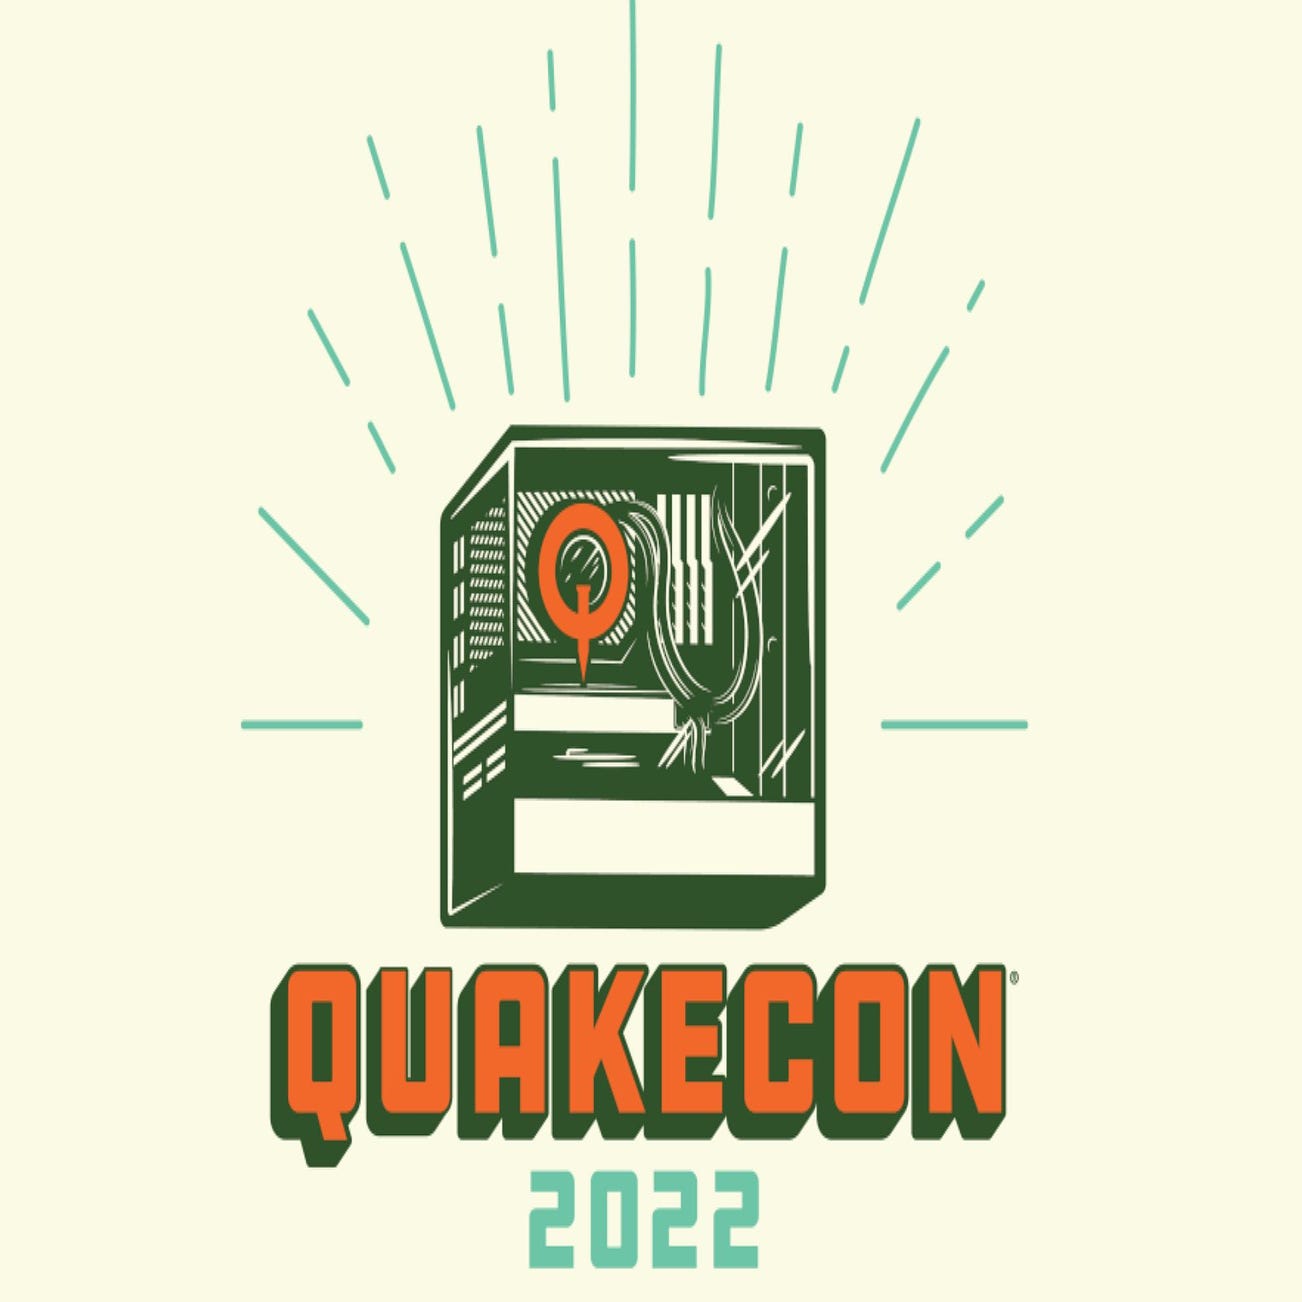 To celebrate QuakeCon 2022 10 games from id Software and Bethesda are